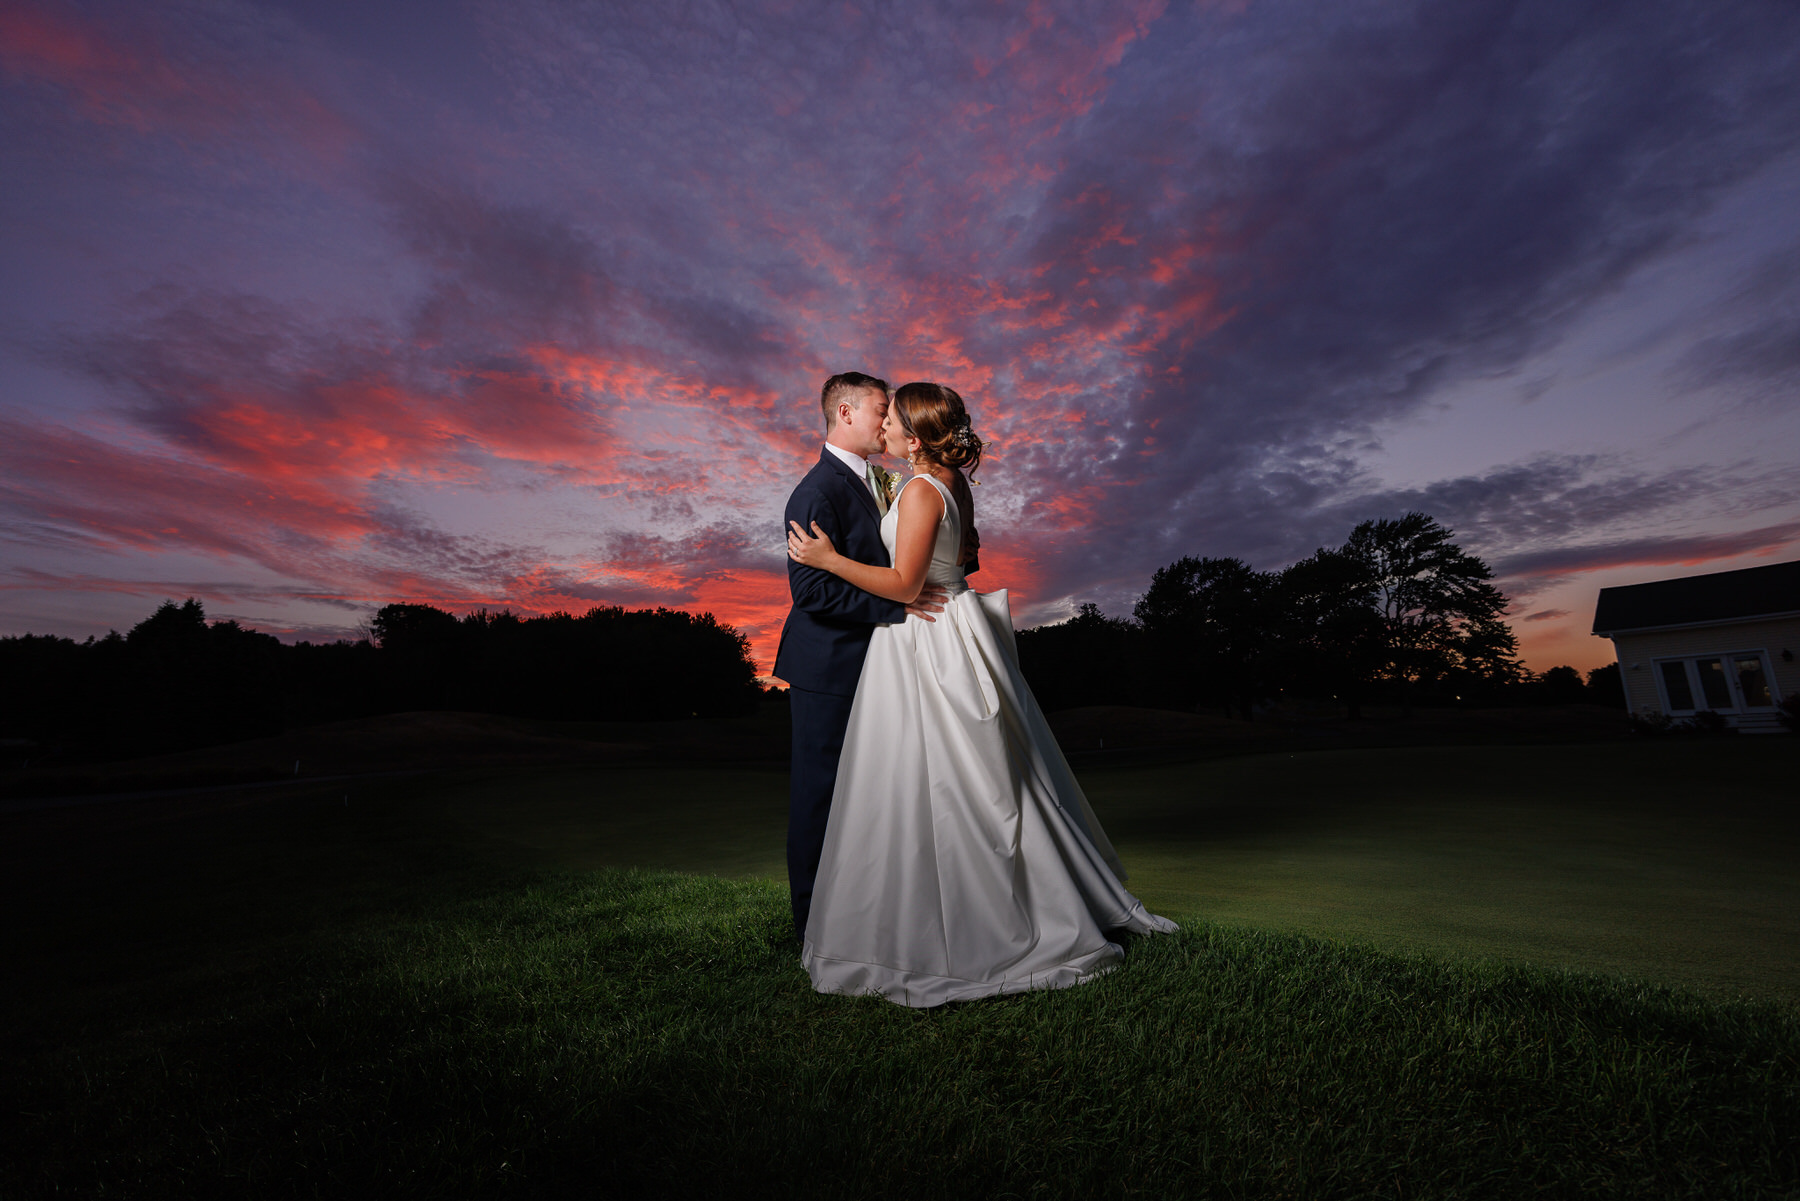 A couple kisses on a golf course at sunset, with a vibrant pink and blue sky above and a white building in the background, perfectly capturing their wedding timeline.